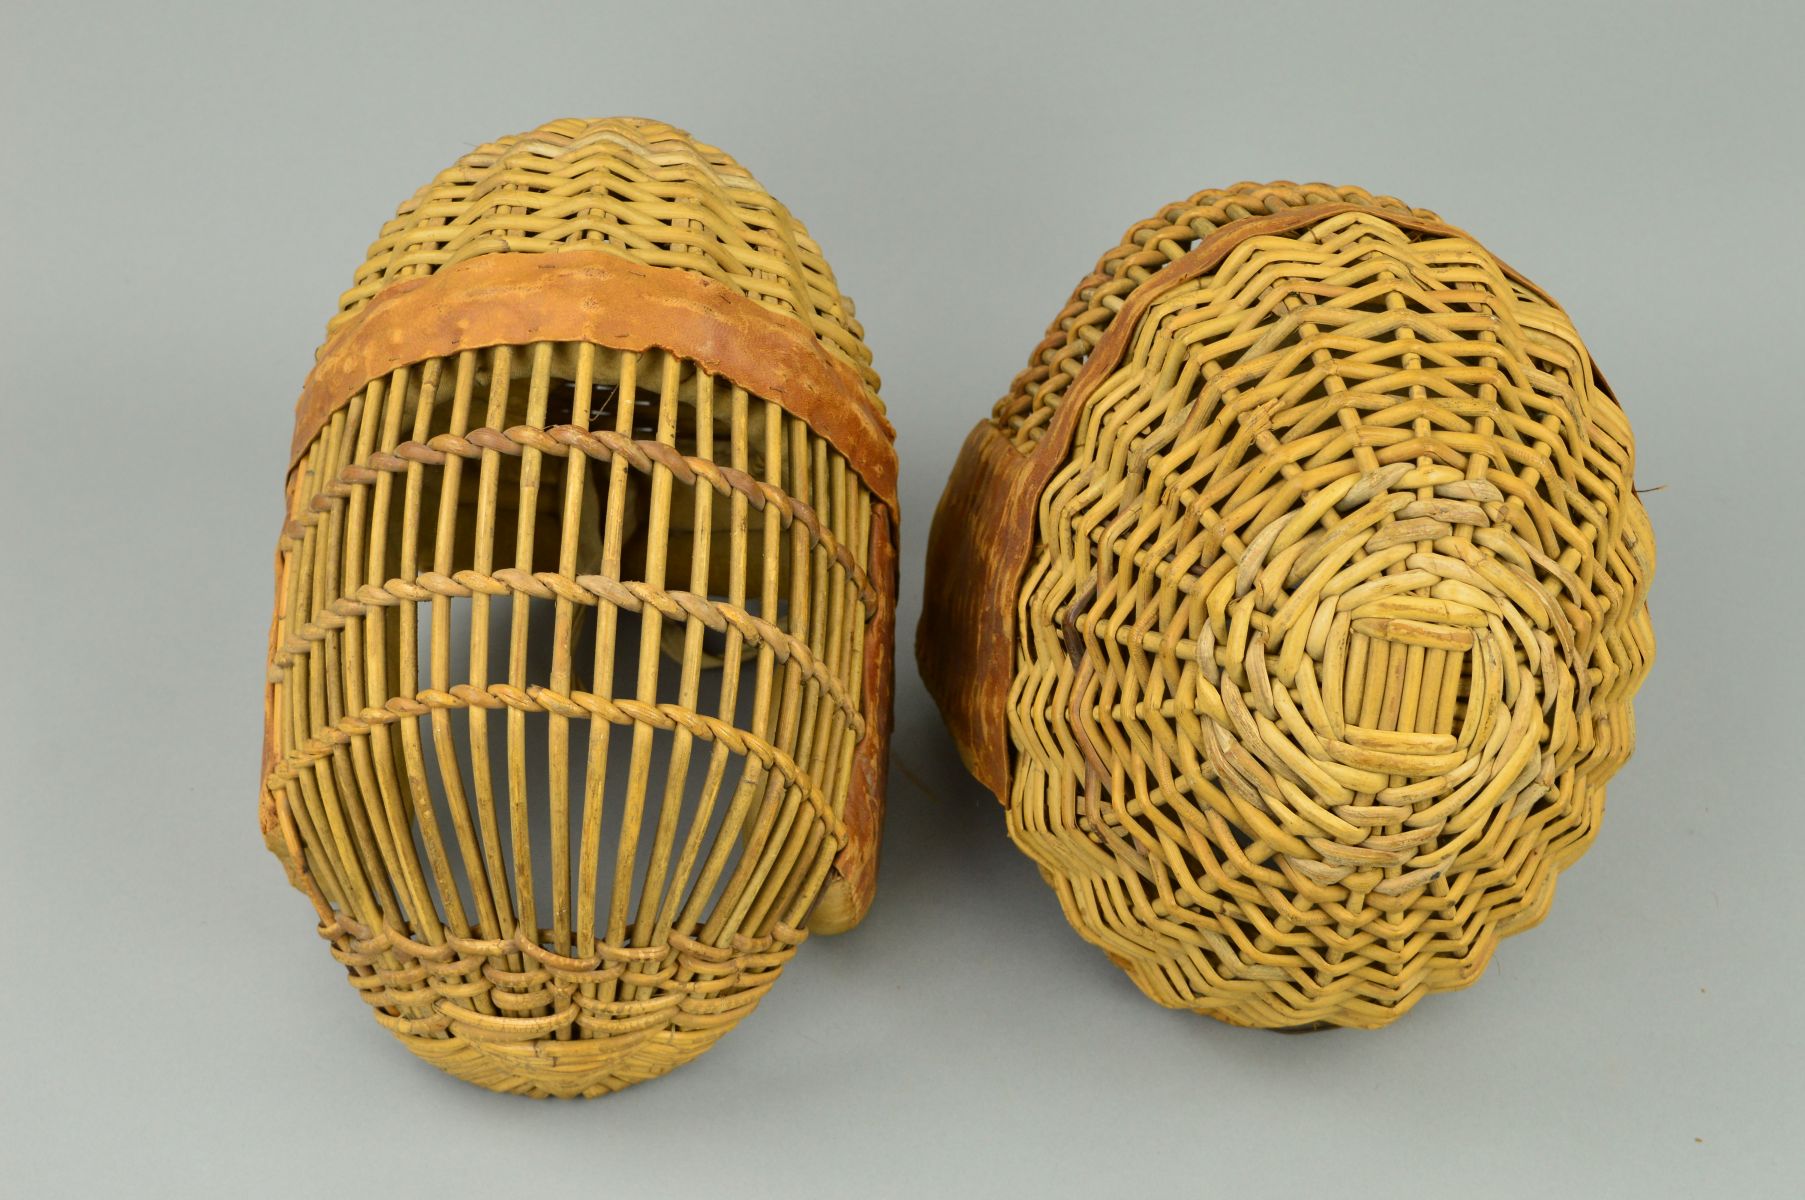 TWO LATE 19TH/EARLY 20TH CENTURY JAPANESE 'KENDO' FACEMASKS, constructed in wicker style, with - Image 4 of 4